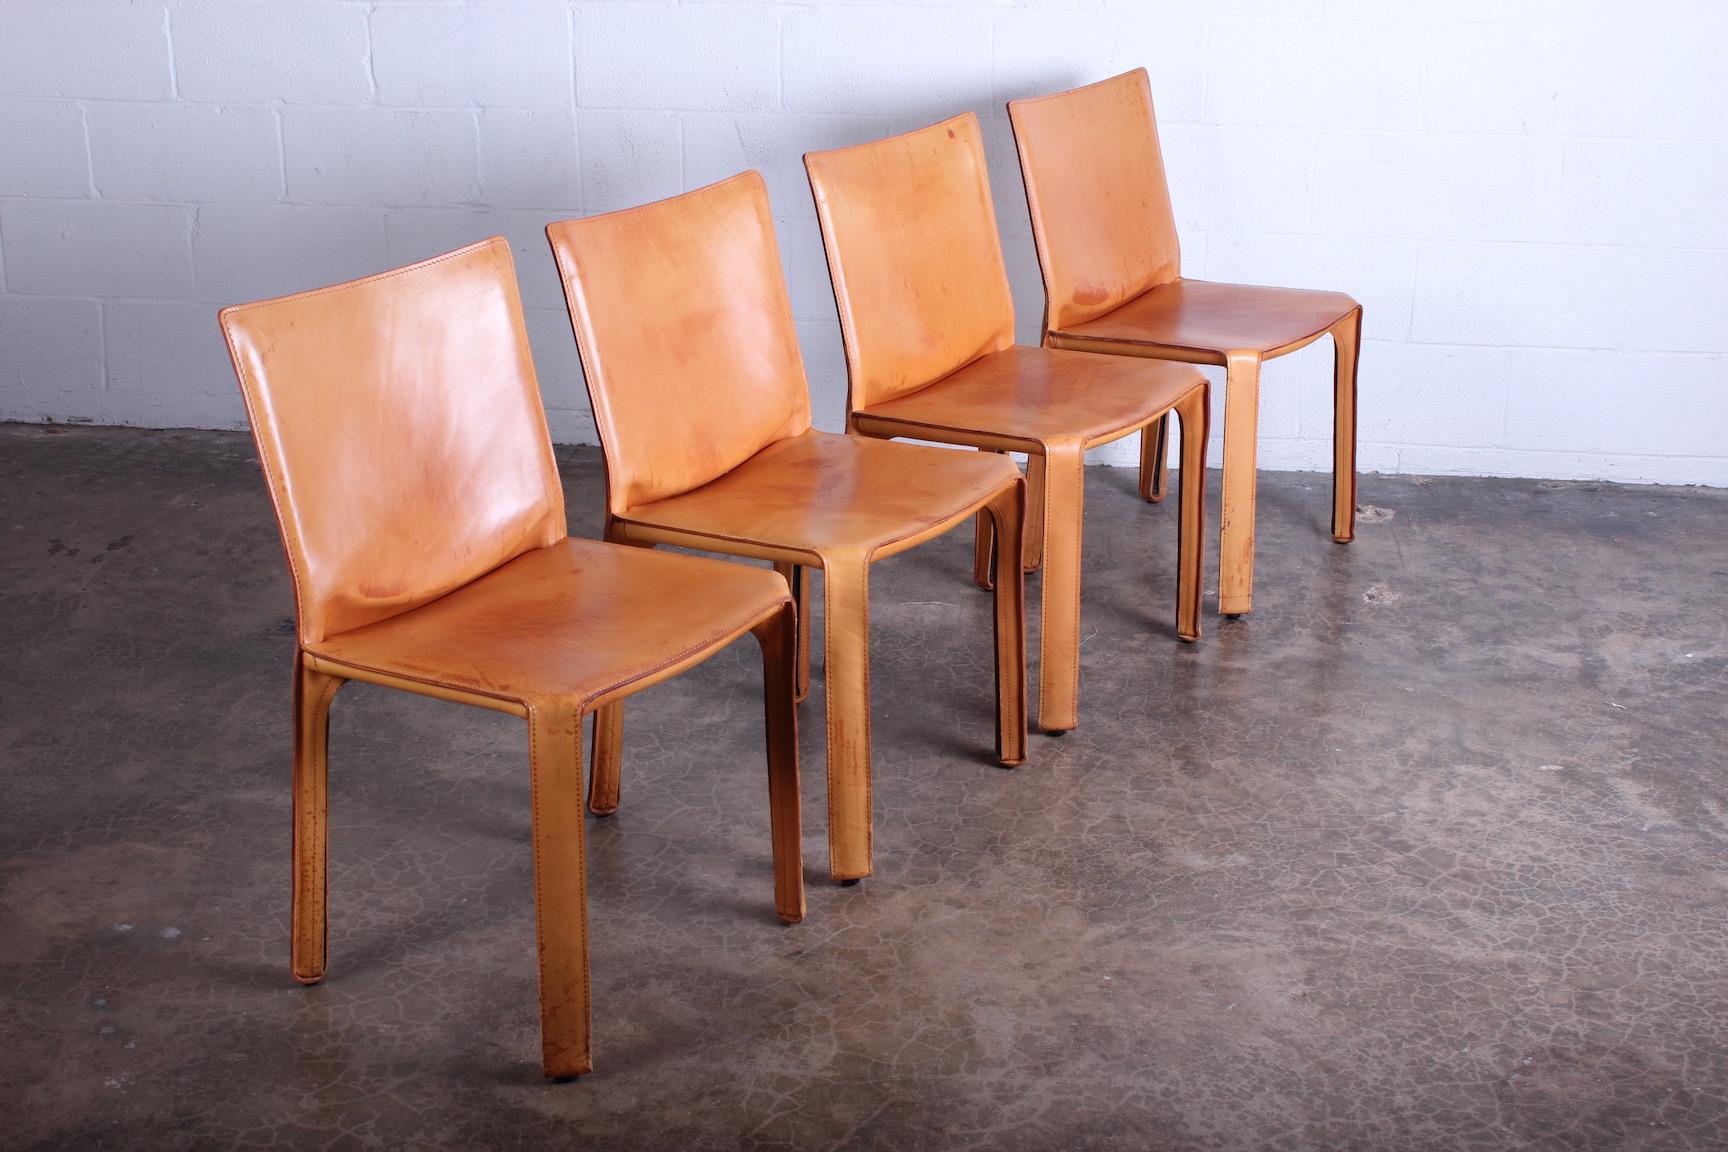 A set of four patinated leather cab chairs designed by Mario Bellini for Cassina.